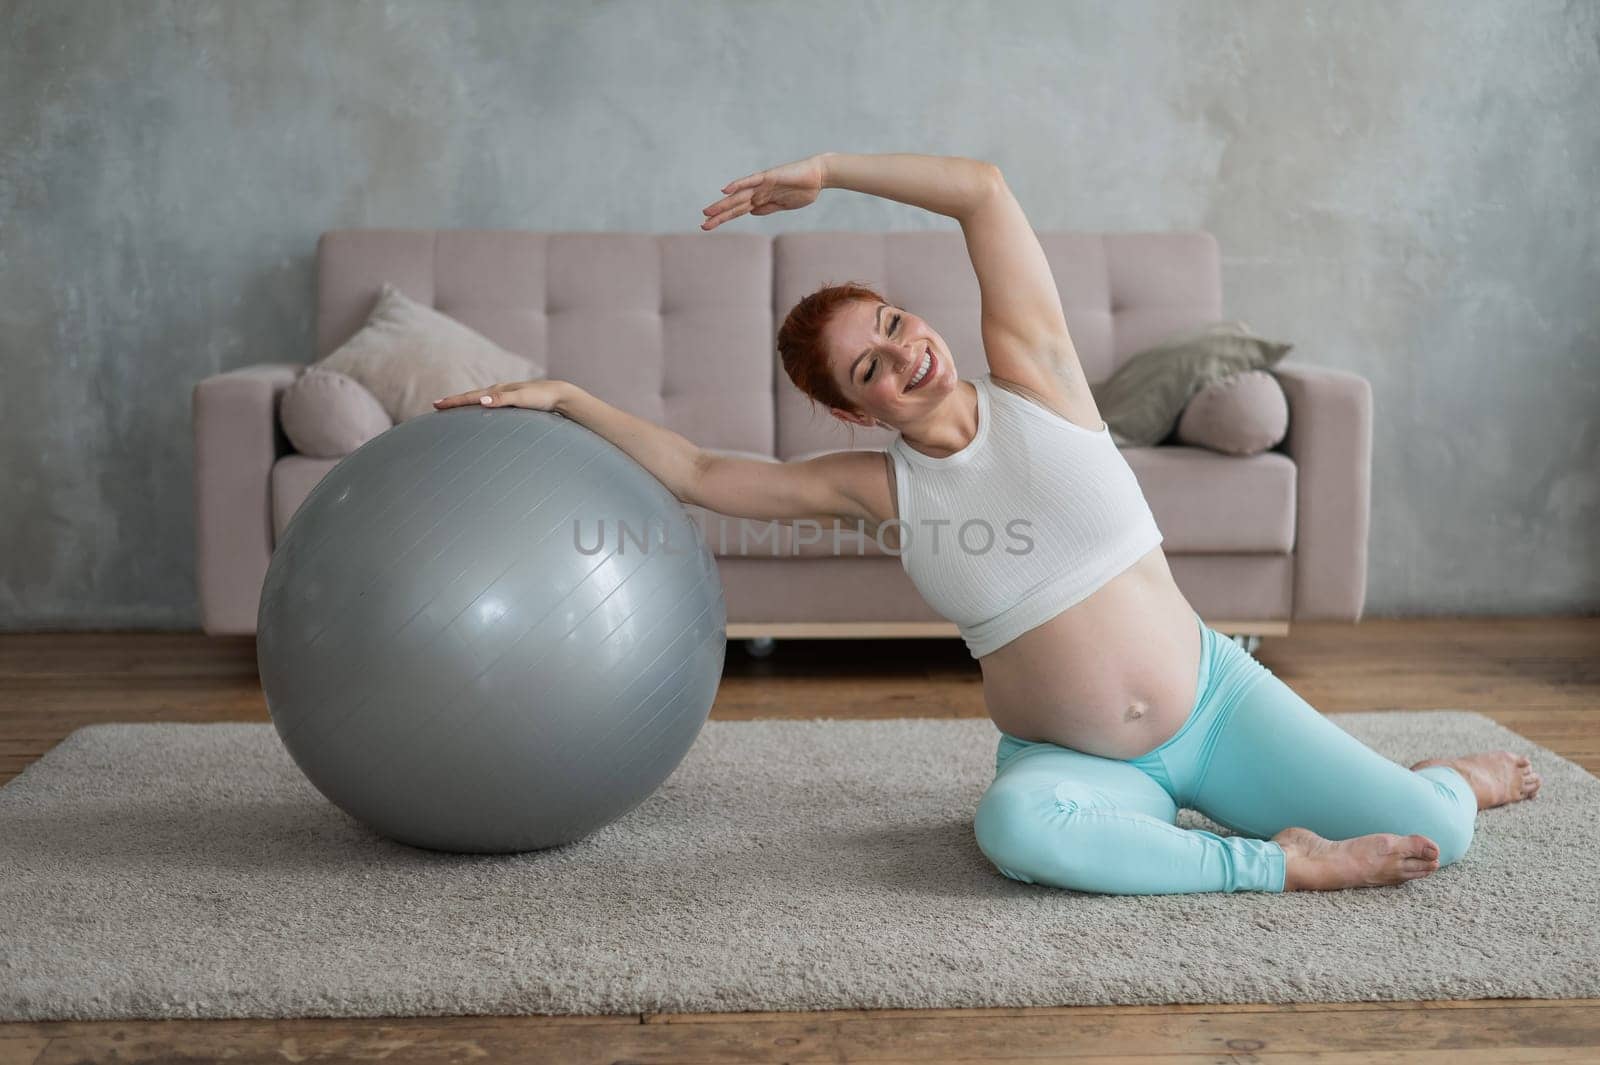 Pregnant woman doing side bends with a fitness ball at home. by mrwed54